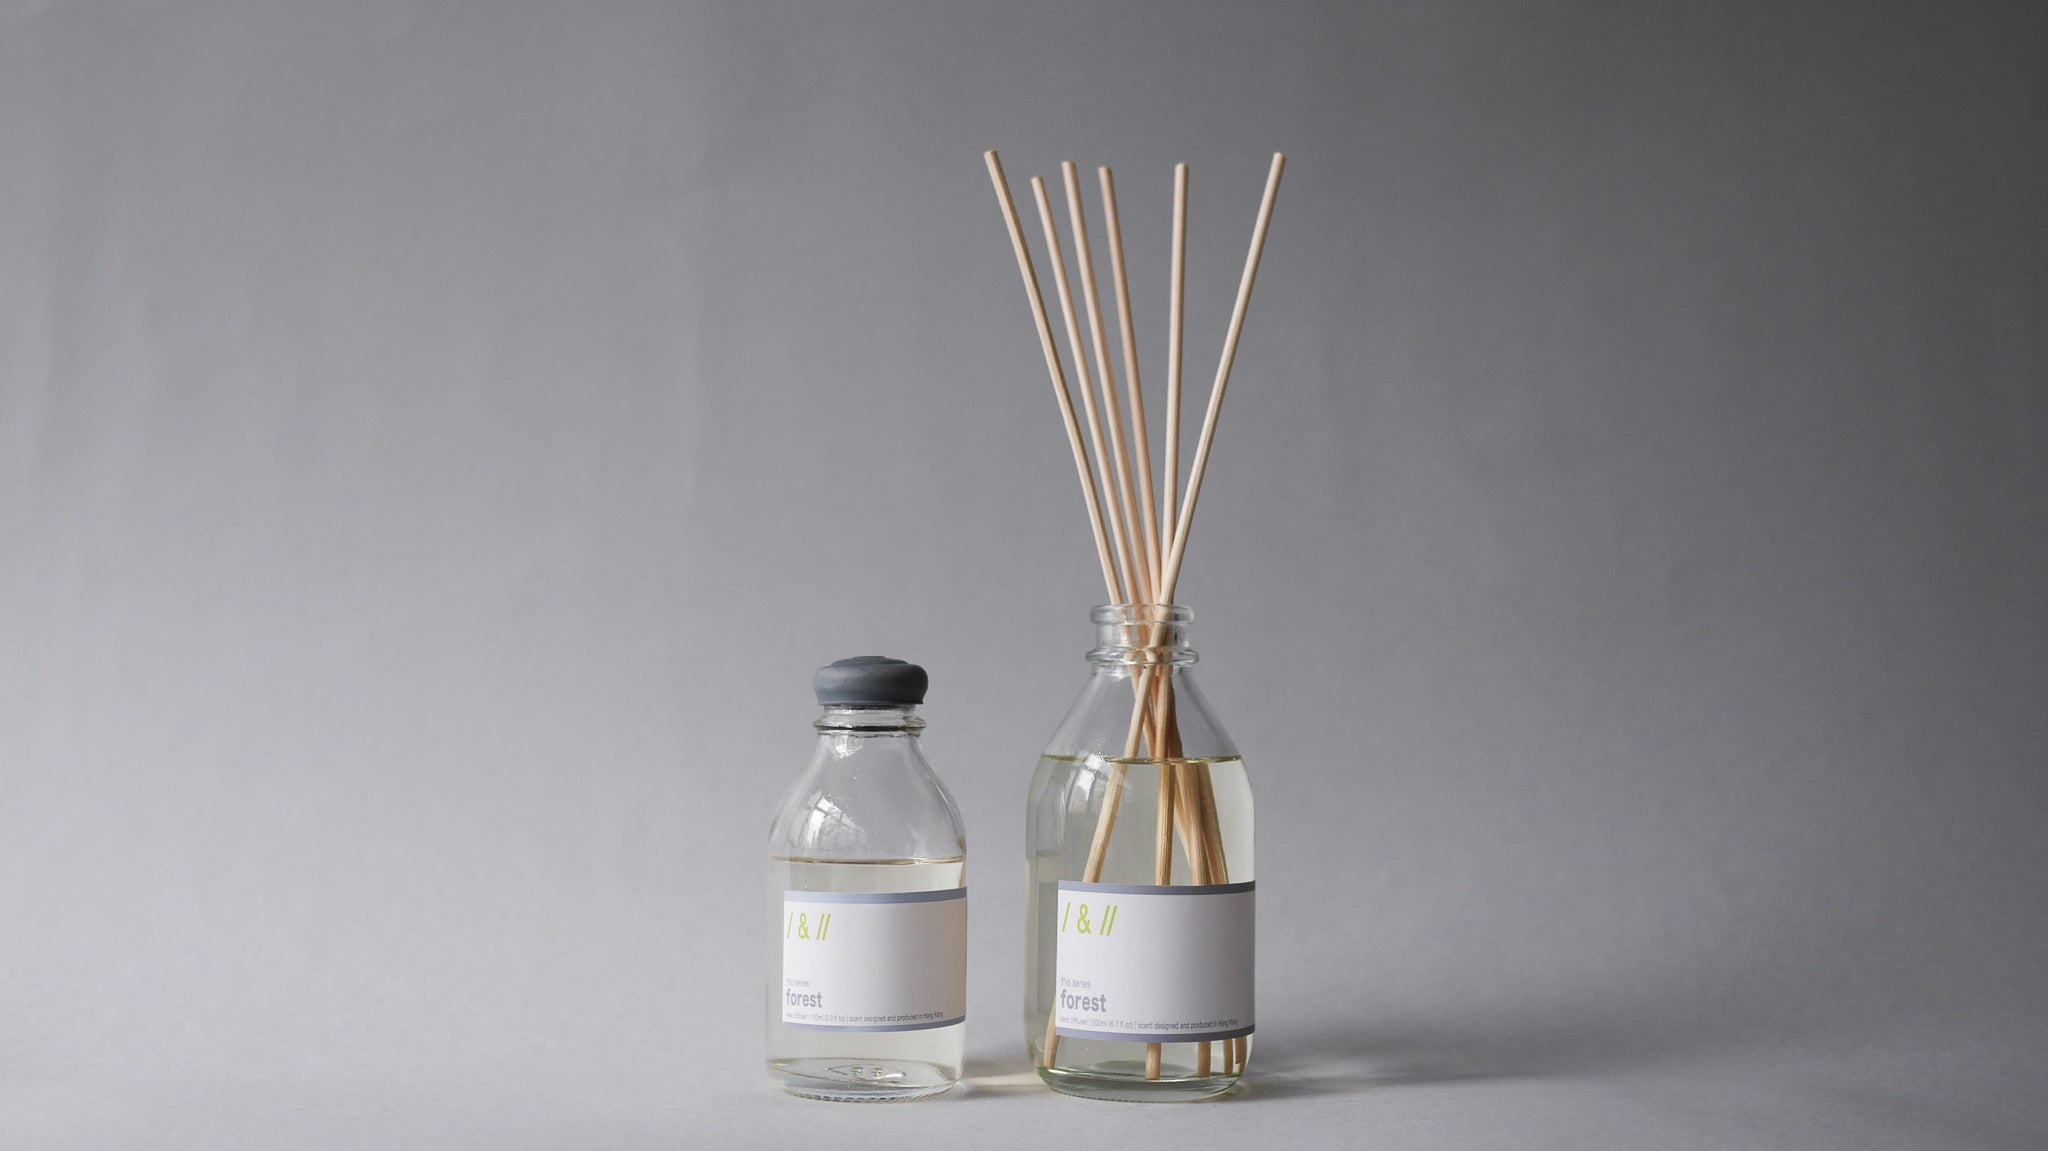 forest / reed diffuser 100ml & 200ml // this series